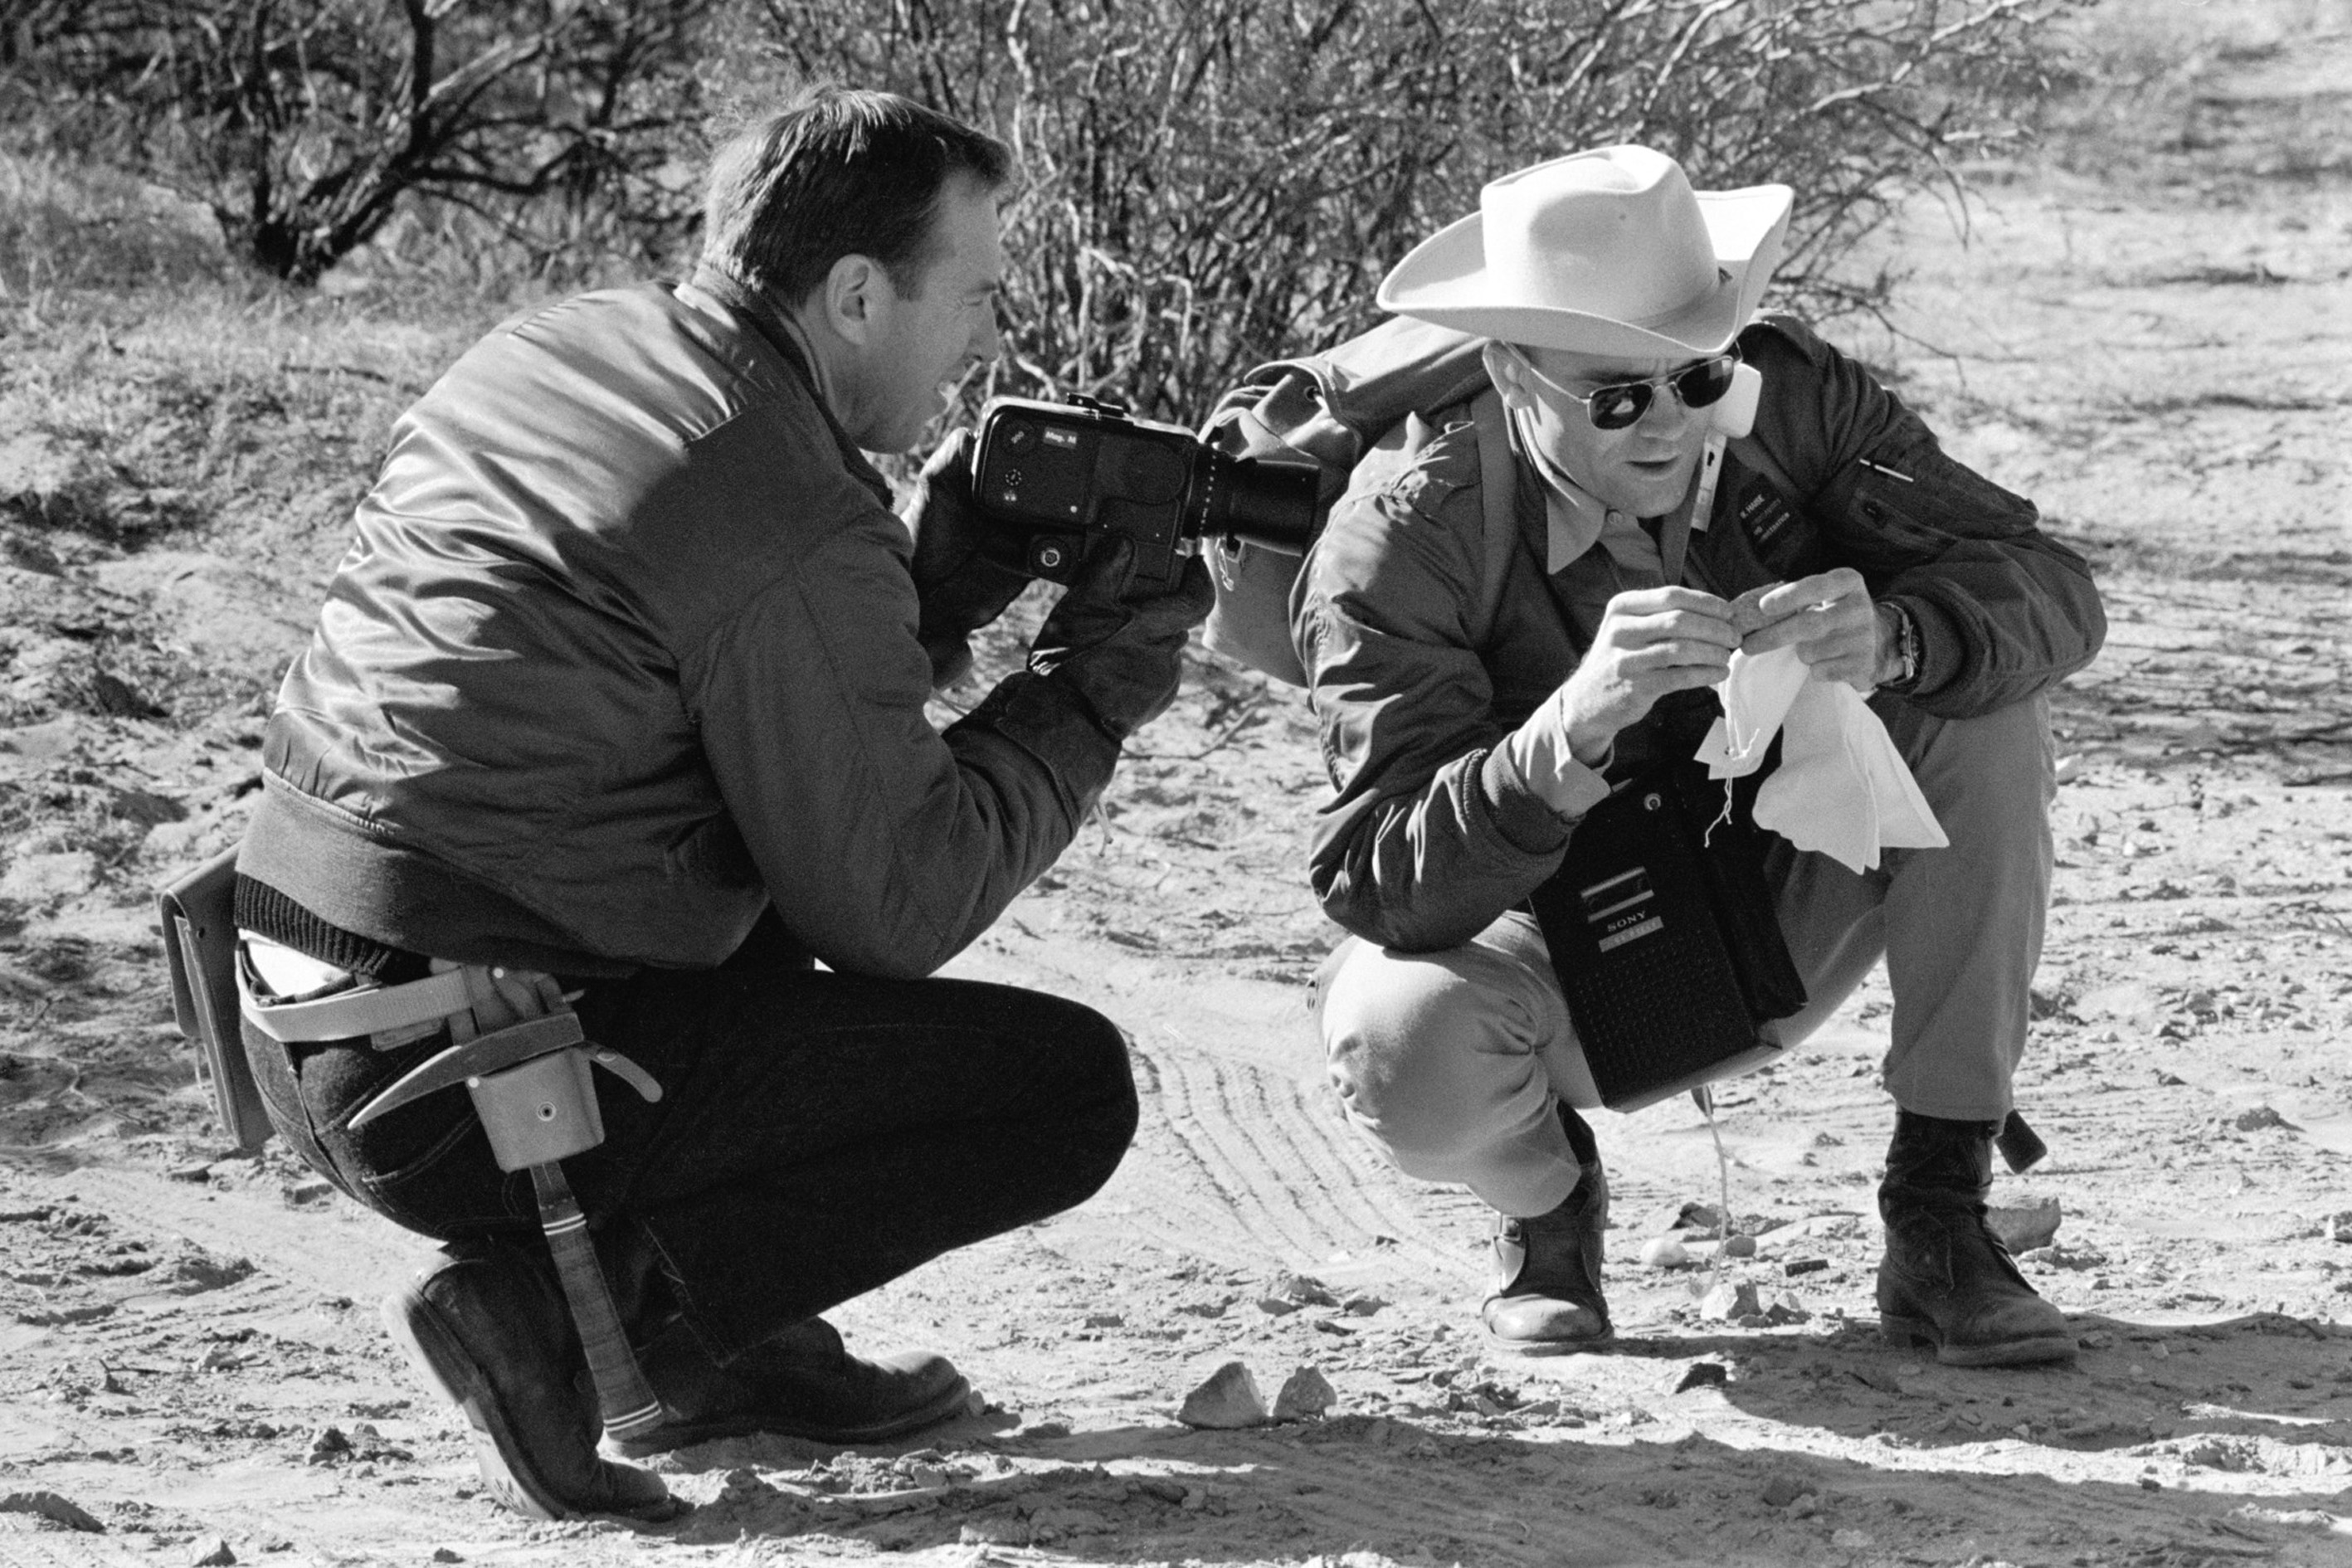 Pictured in January 1970, astronauts Jim Lovell (left) and Fred Haise perform a geological training exercise in the Quitman Mountains of far-western Texas. Had Apollo 19 not been canceled, it is likely that Haise would have commanded the final mission to the Moon. Photo Credit: NASA